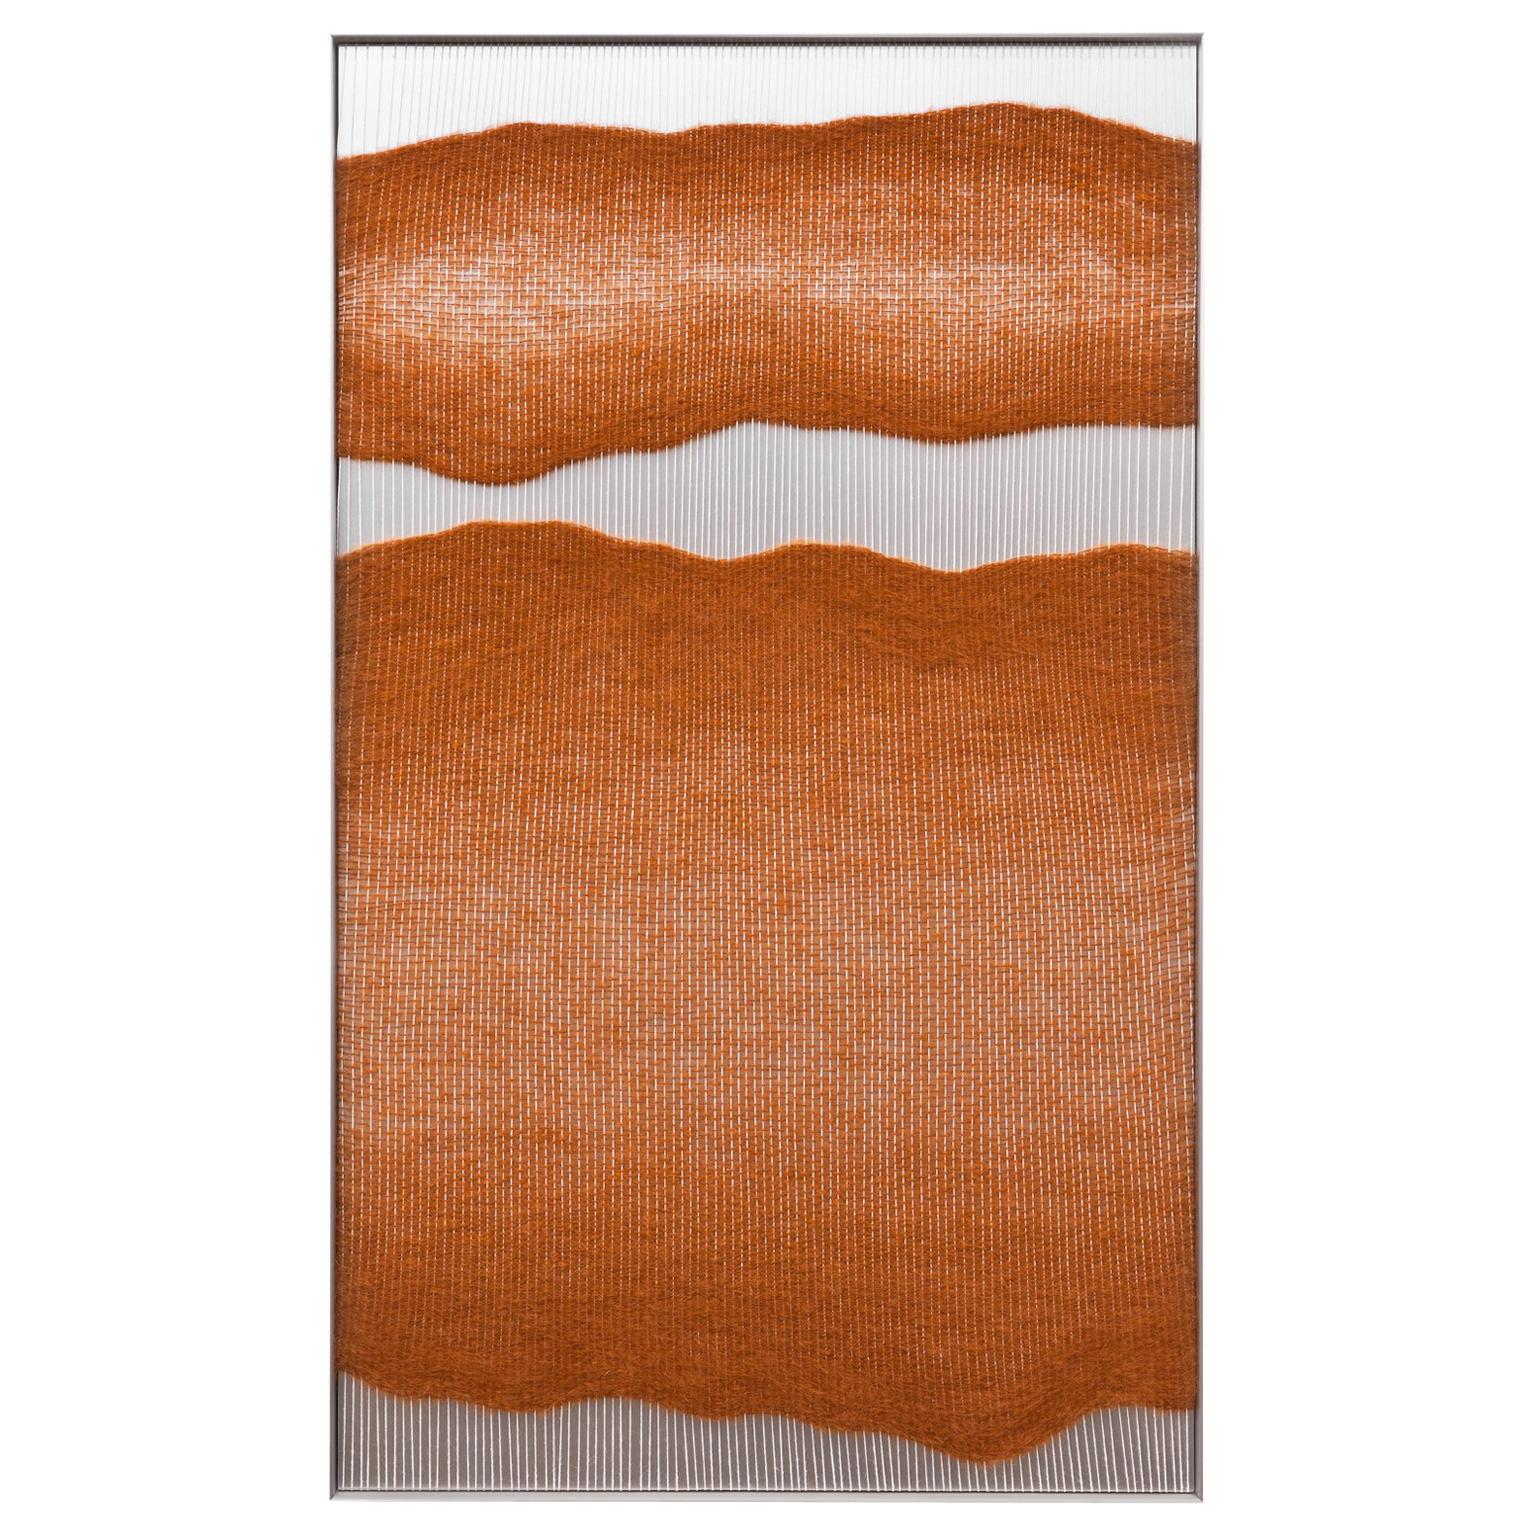 Contemporary Handwoven Wall Fiber Art, Rust Edge Forms by Mimi Jung For Sale